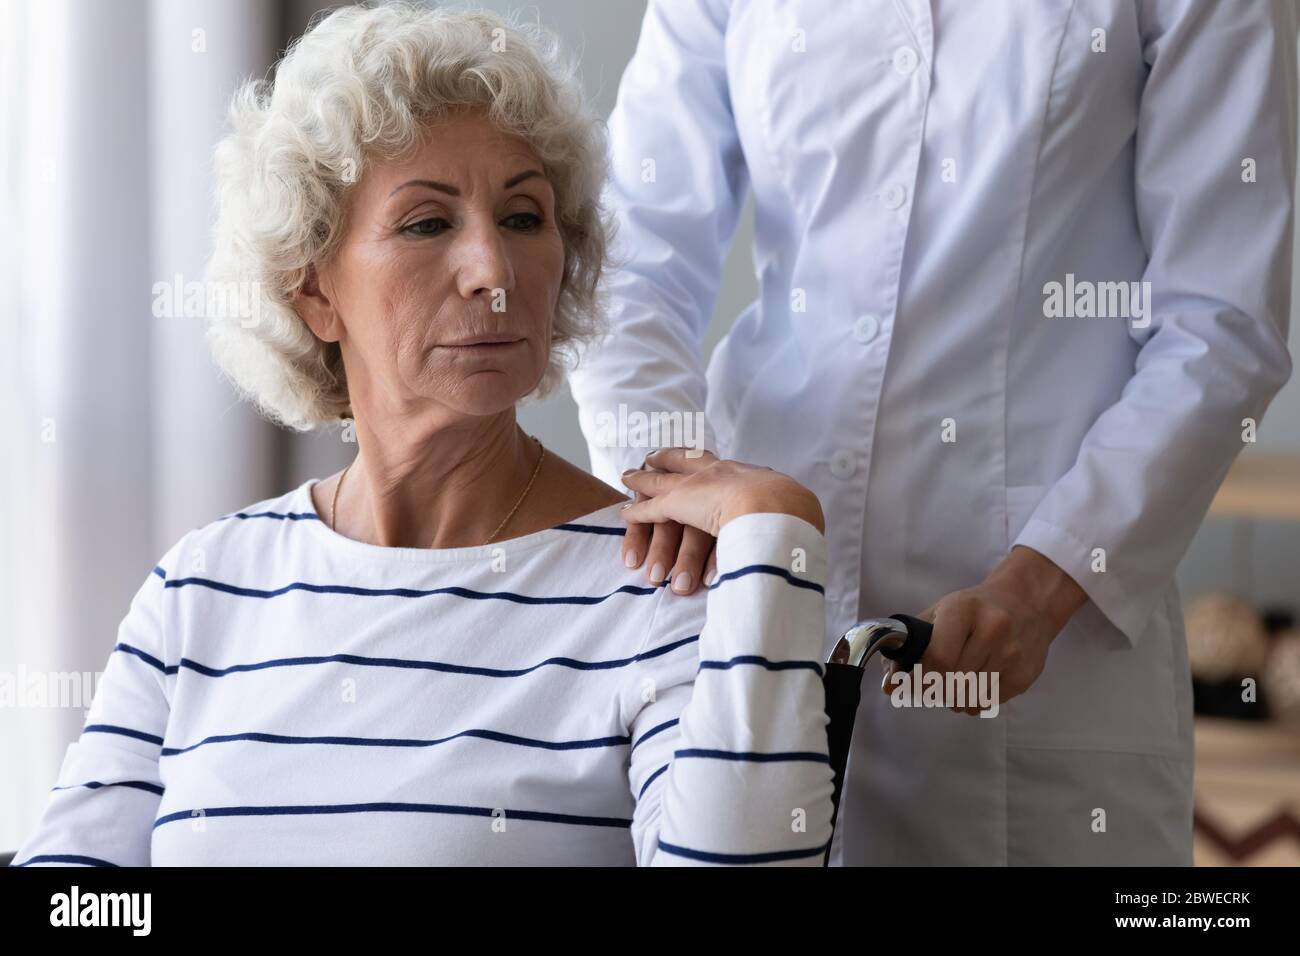 Sad handicapped woman sitting in wheelchair holding hand of caregiver Stock Photo